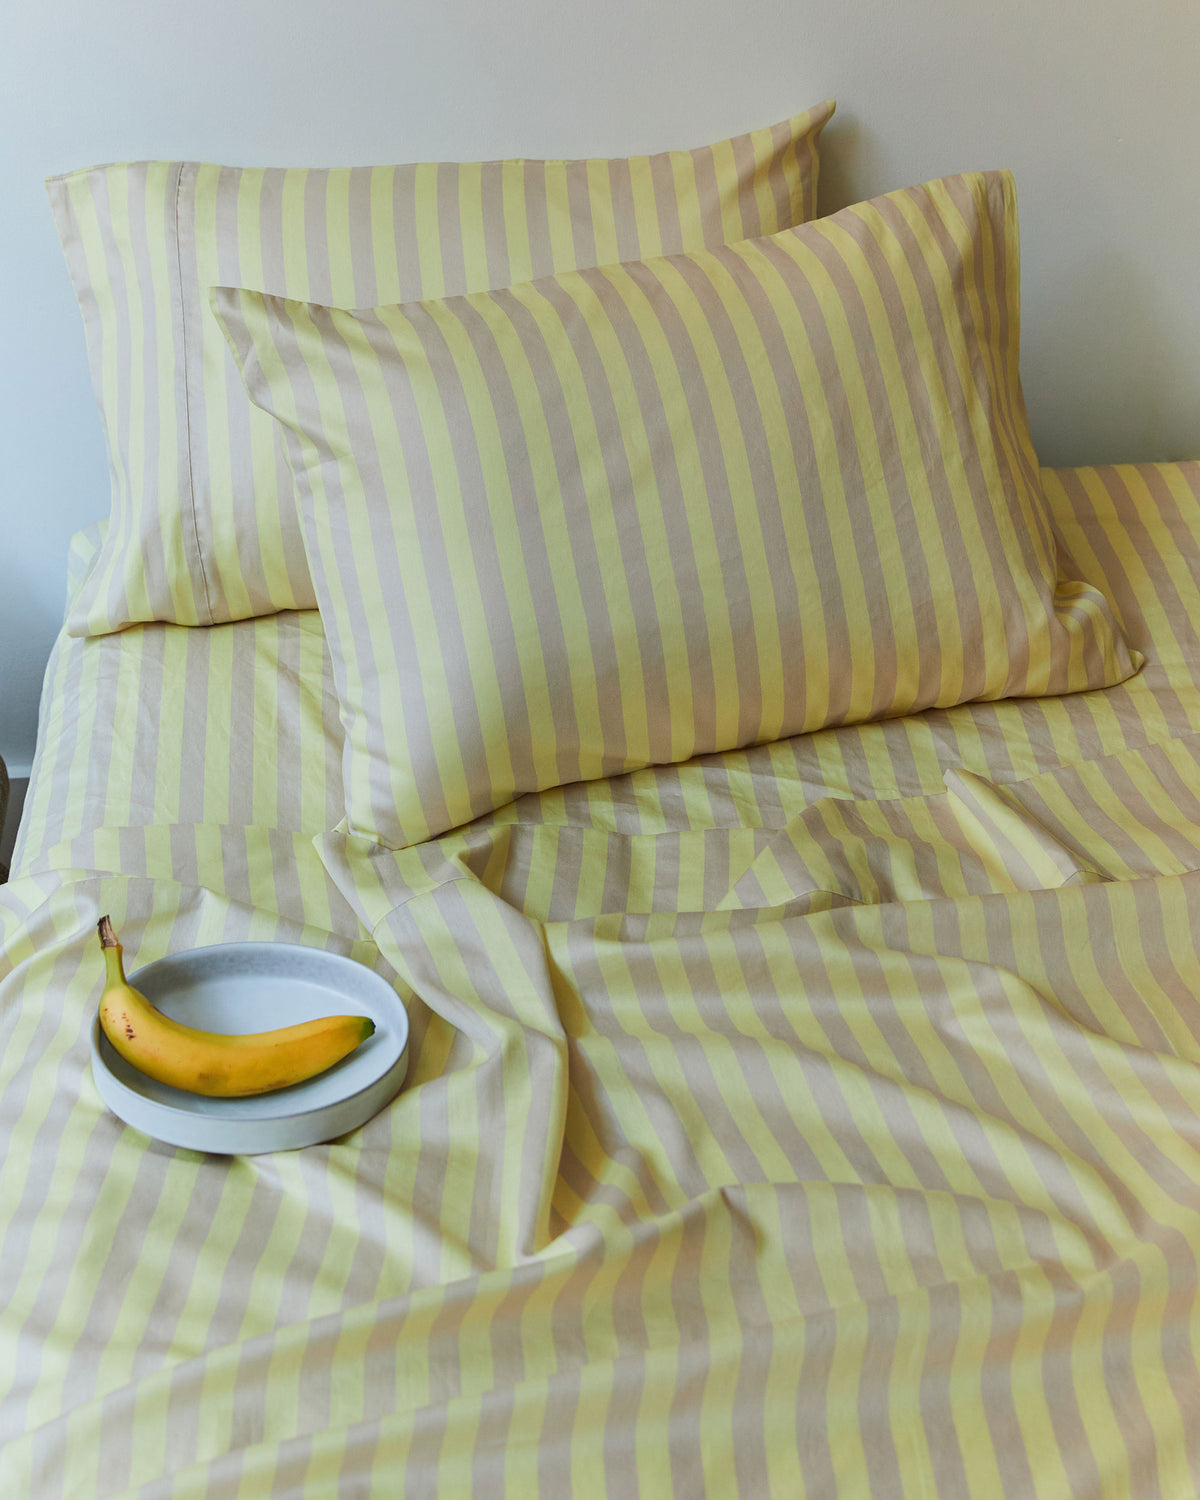 Dusen Dusen Sand Stripe Sheets. Flat Sheet and Sheet Sets in tan and yellow stripes. 100% cotton sateen, 300 thread count. Machine wash cold and tumble dry. Made in Portugal. Our cotton sateen is smooth and cool to the touch and features a slightly lustrous finish.